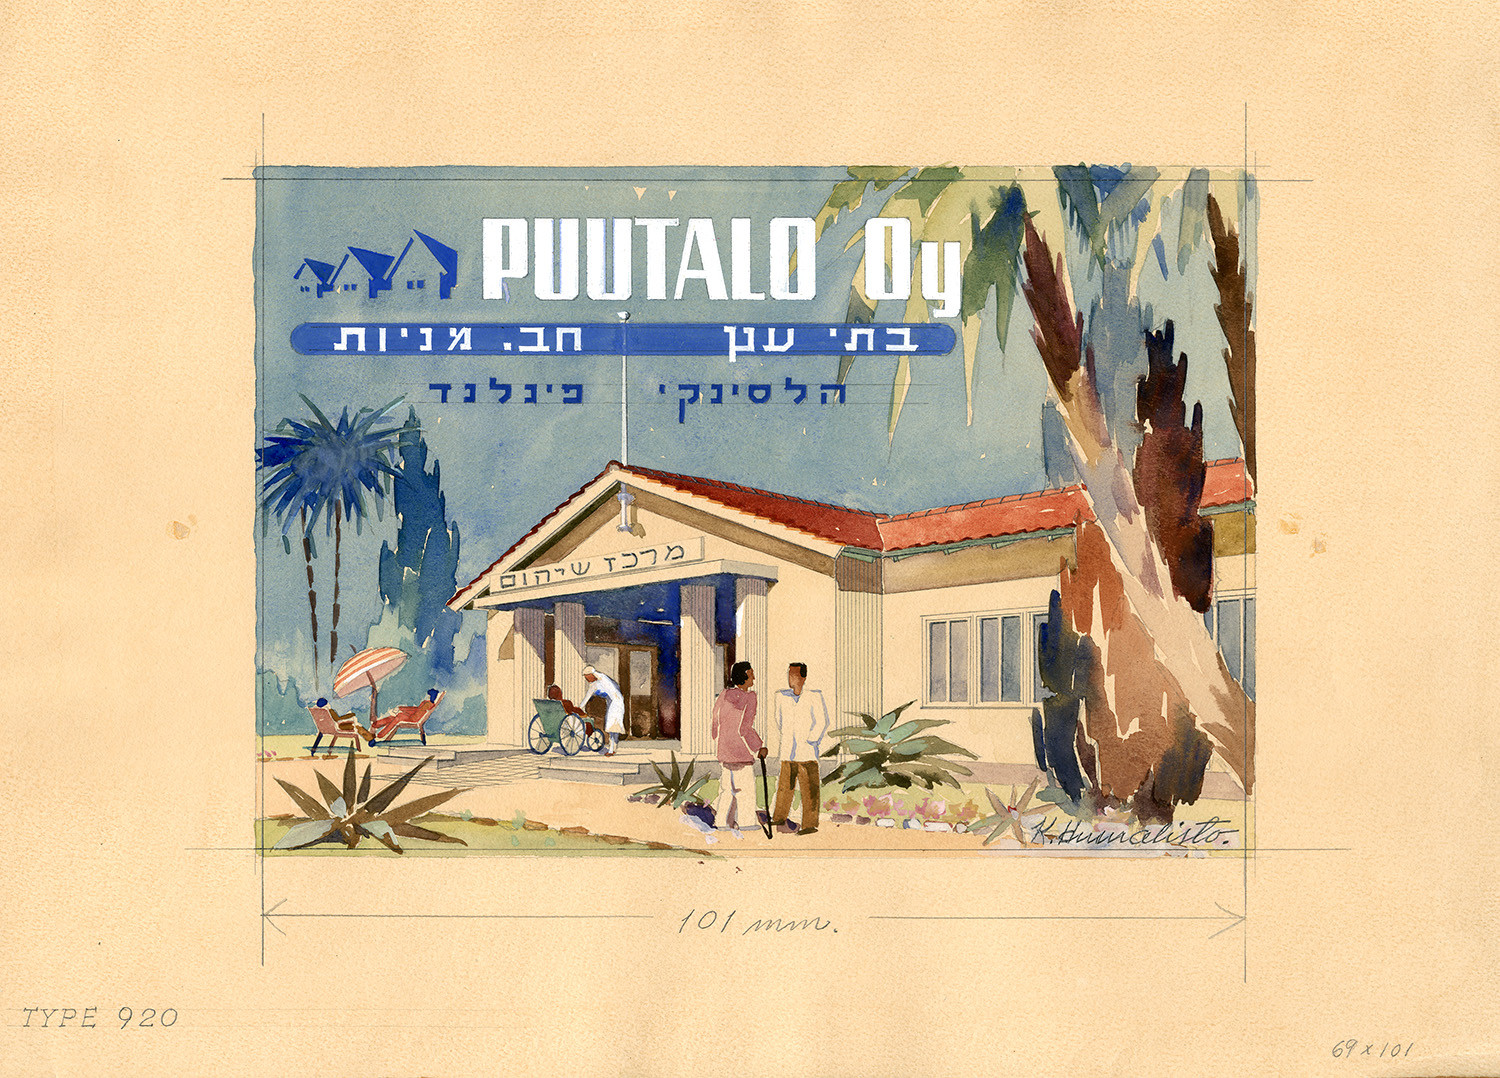 A lively advertisement painted in watercolors of Puutalo Oy's hospital in Israel. There are palm trees and people walking or resting under a parasol in the hospital yard.